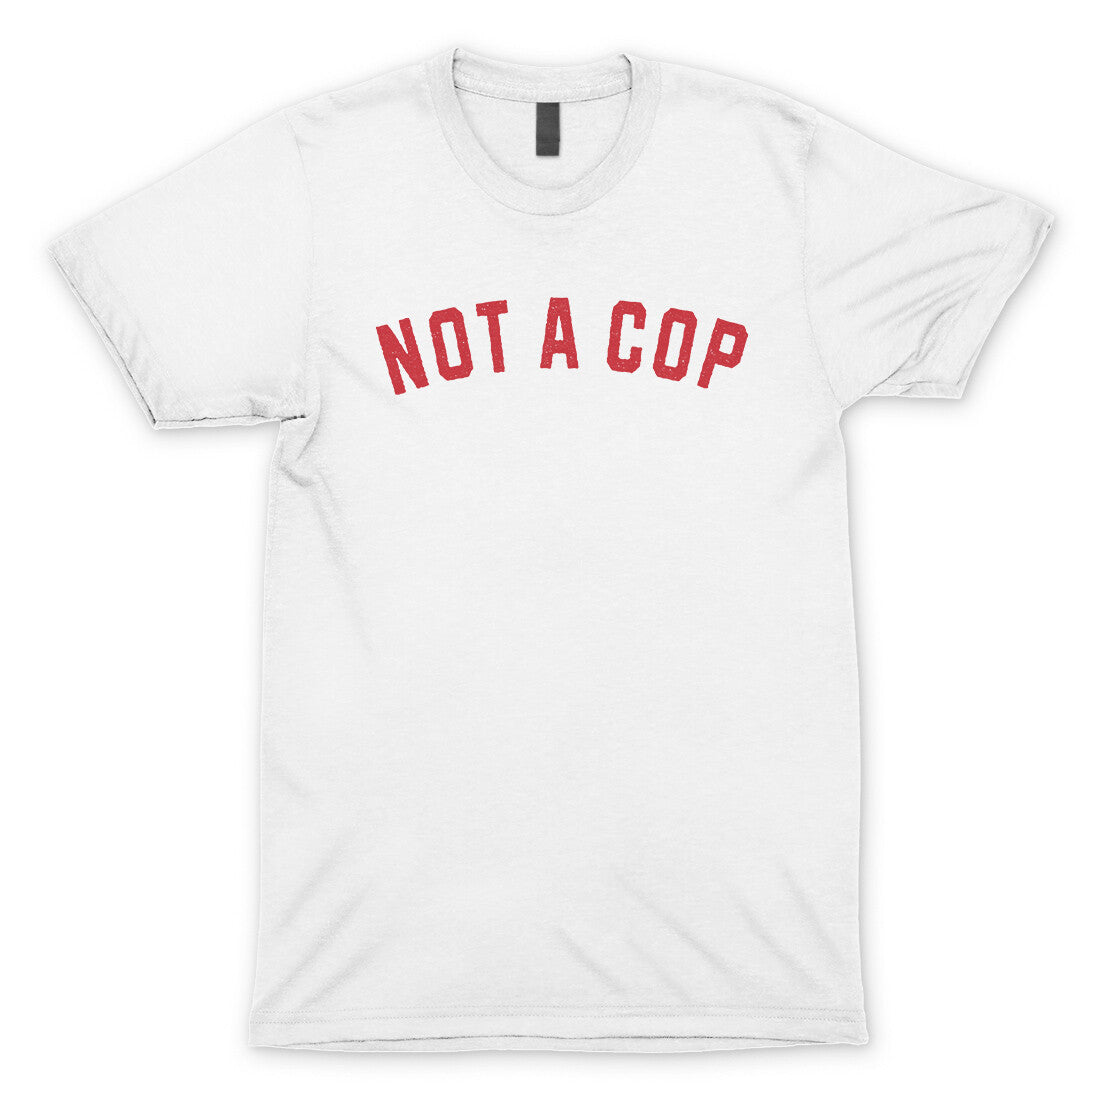 Not a Cop in White Color